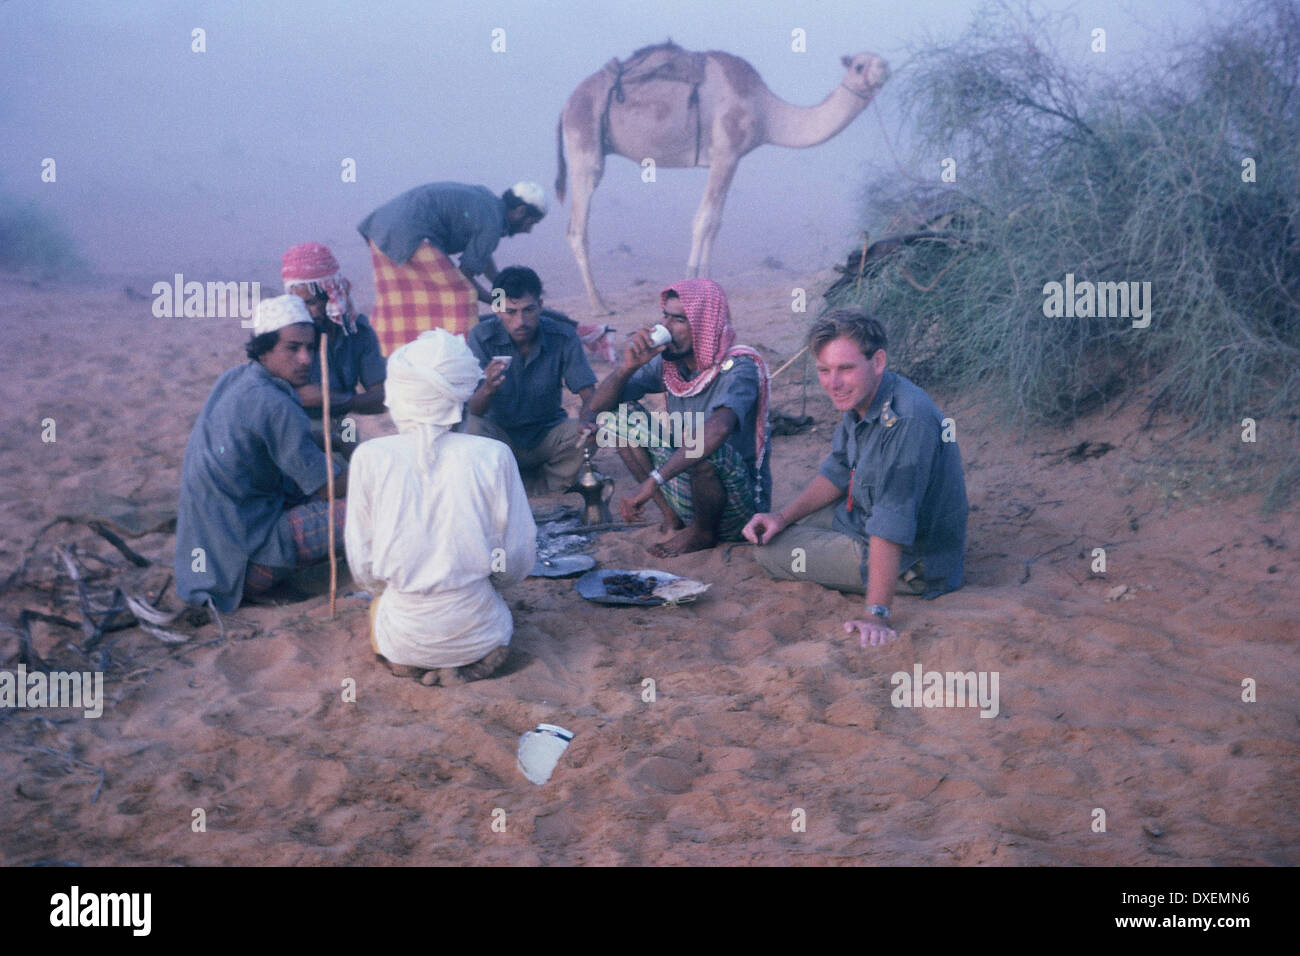 Arab men and British soldiers taking coffee in the desert, with camel in background. Stock Photo